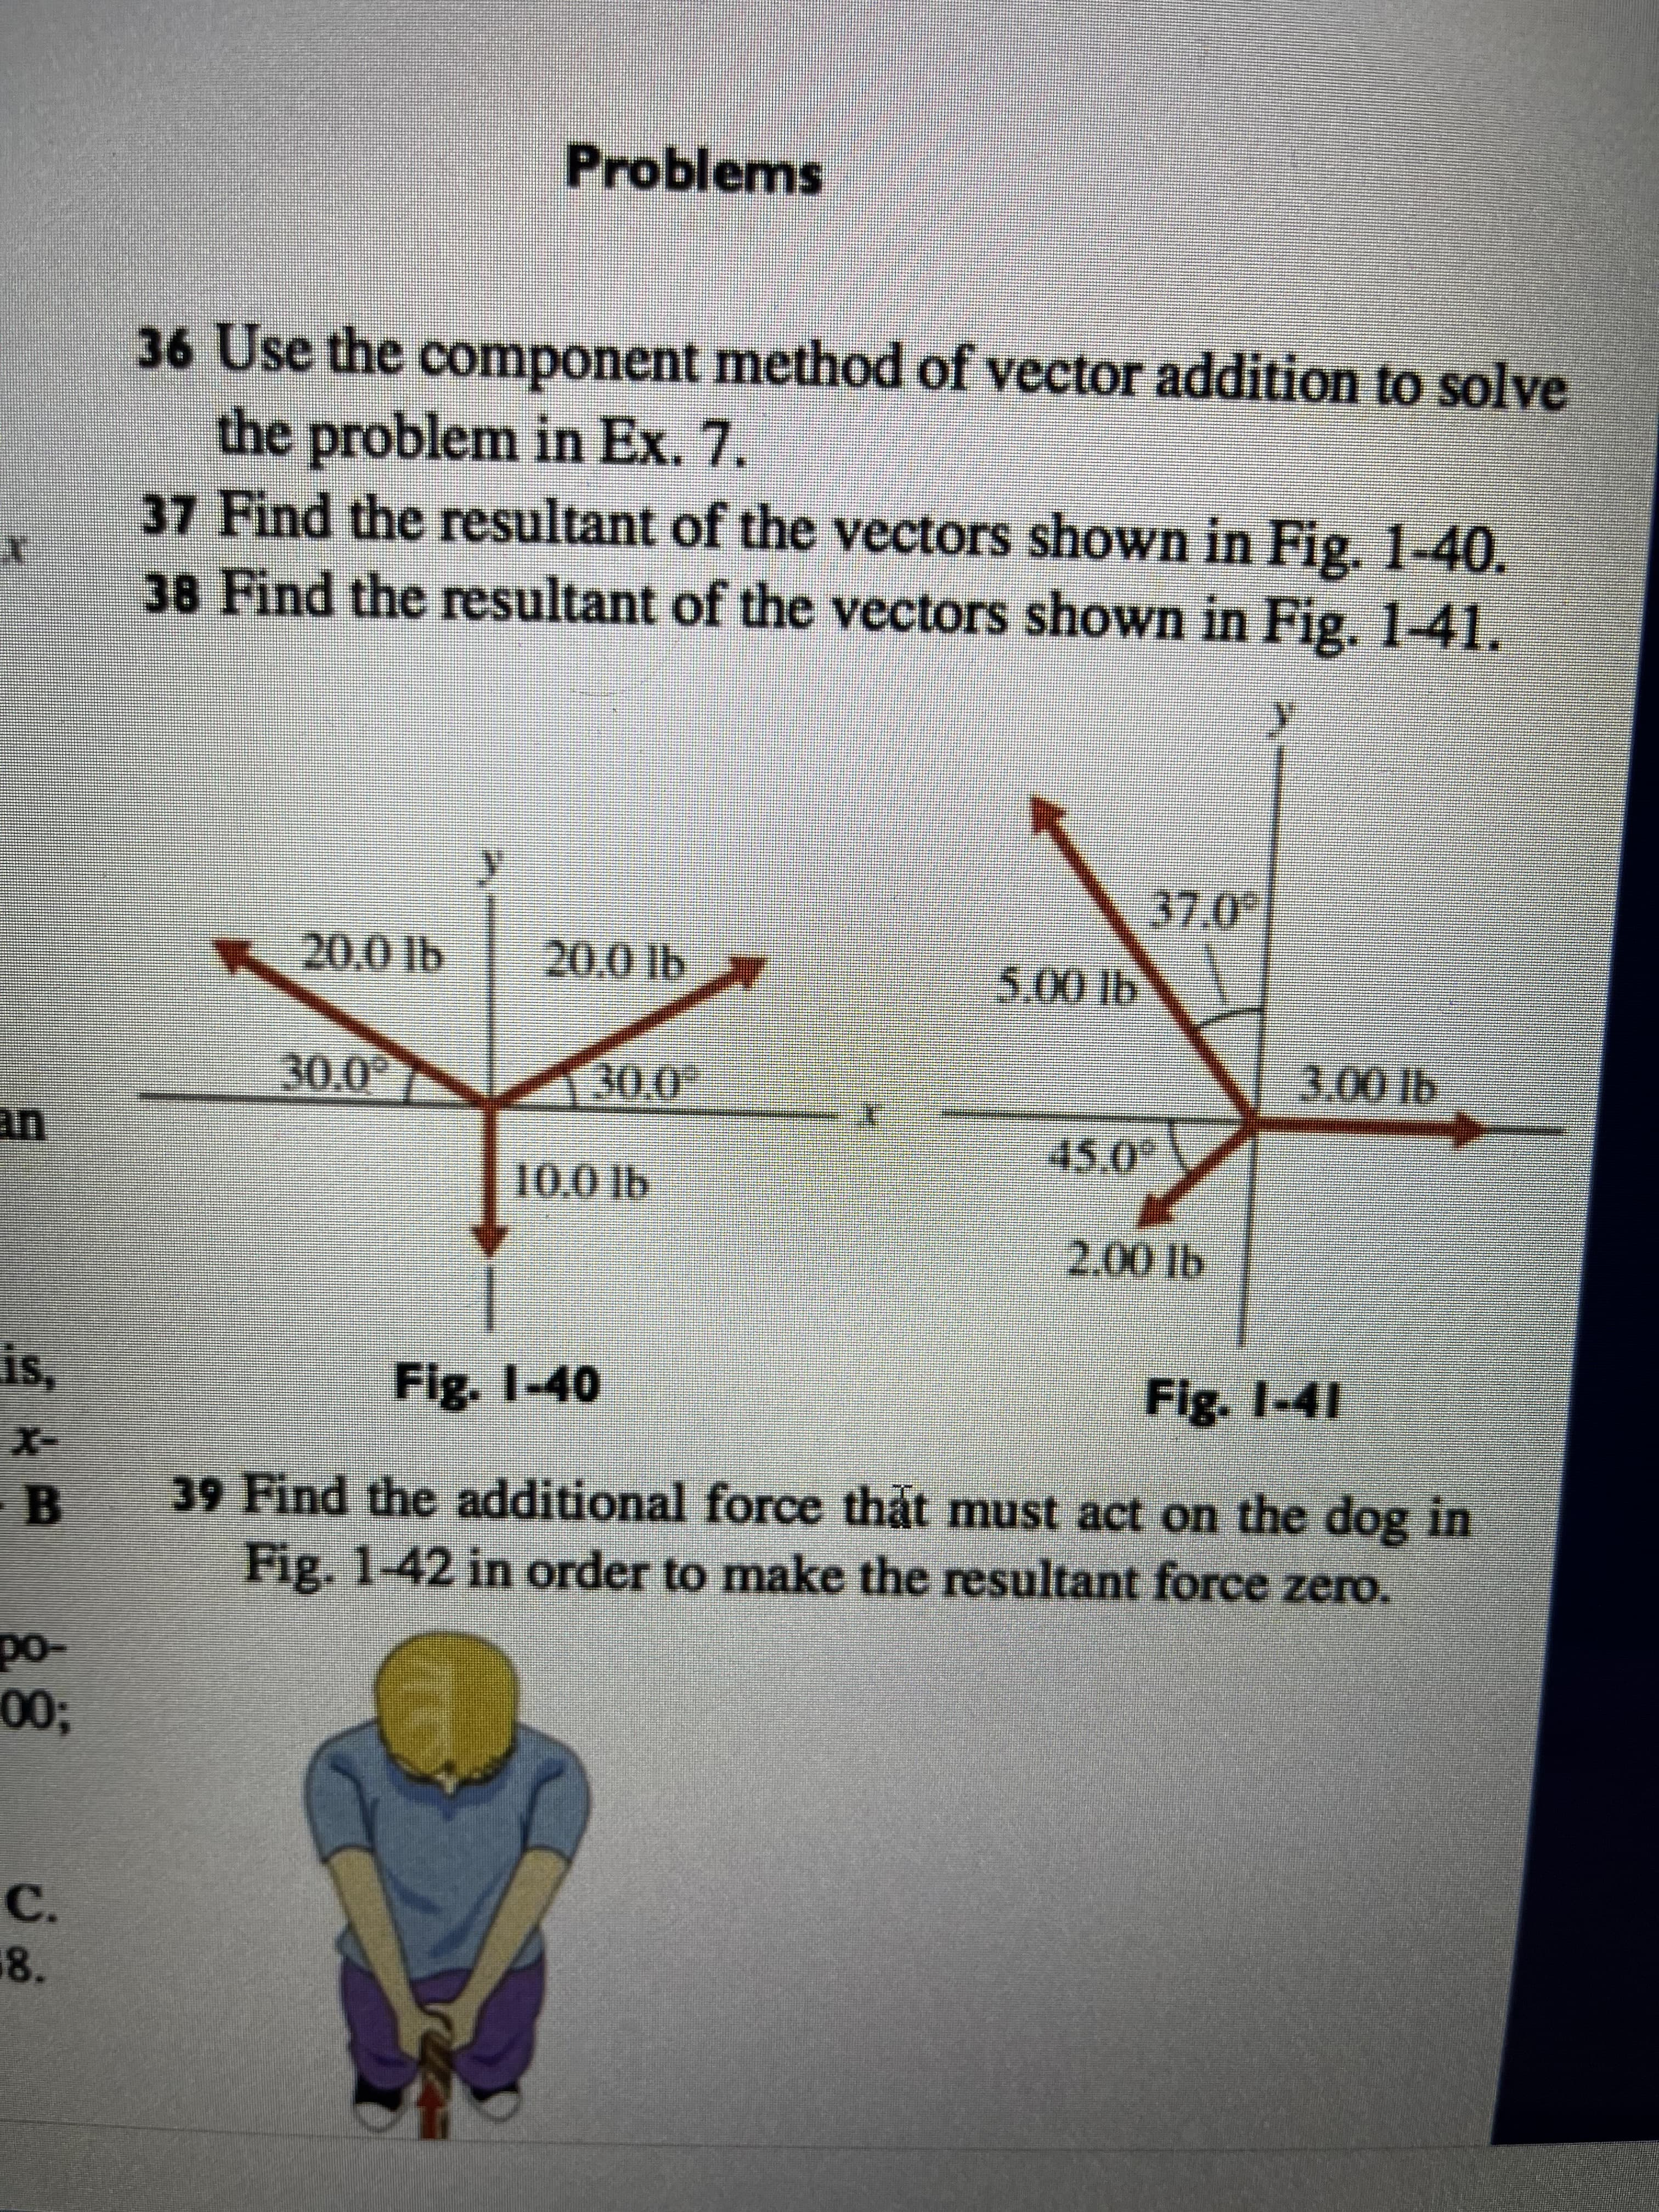 E
is,
B
Do-
00;
C.
8.
Problems
36 Use the component method of vector addition to solve
the problem in Ex. 7.
37 Find the resultant of the vectors shown in Fig. 1-40.
38 Find the resultant of the vectors shown in Fig. 1-41.
37.0°
20.0 lb
20.0 lb
.
5.00 lb
30.0
45.0
30.0°
10,0 lb
2.00 lb
3.00 lb
Fig. 1-40
Fig. 1-41
39 Find the additional force that must act on the dog in
Fig. 1-42 in order to make the resultant force zero.